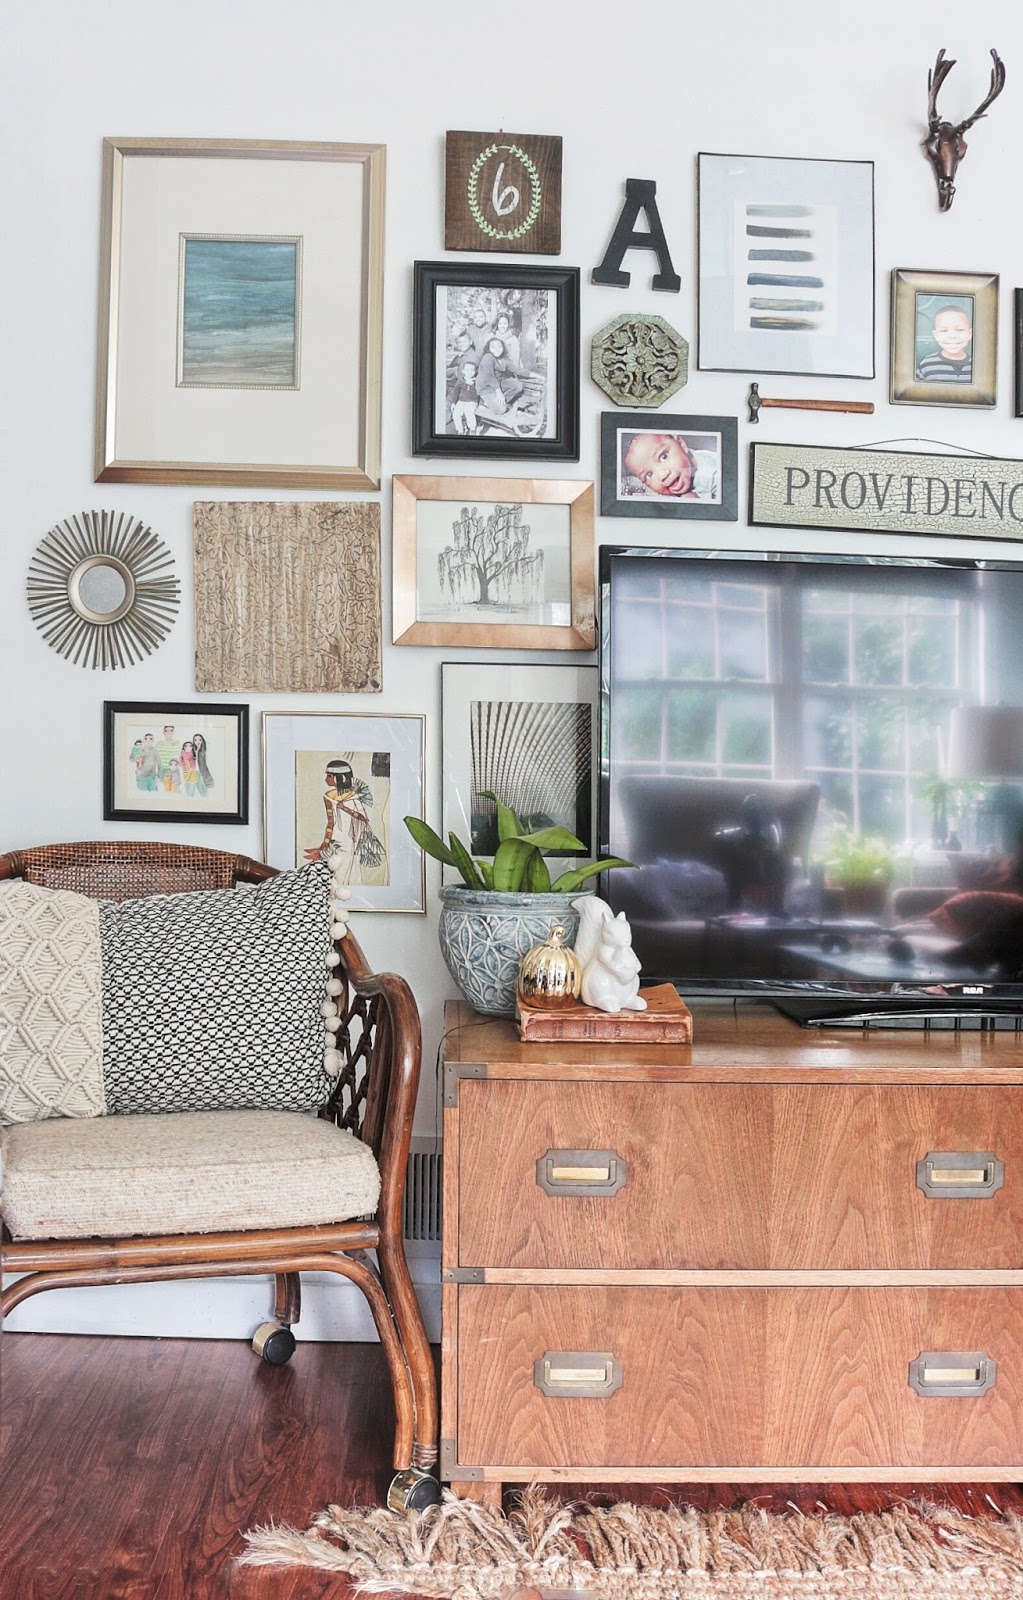 Tools, tips and tricks for an eclectic gallery wall.